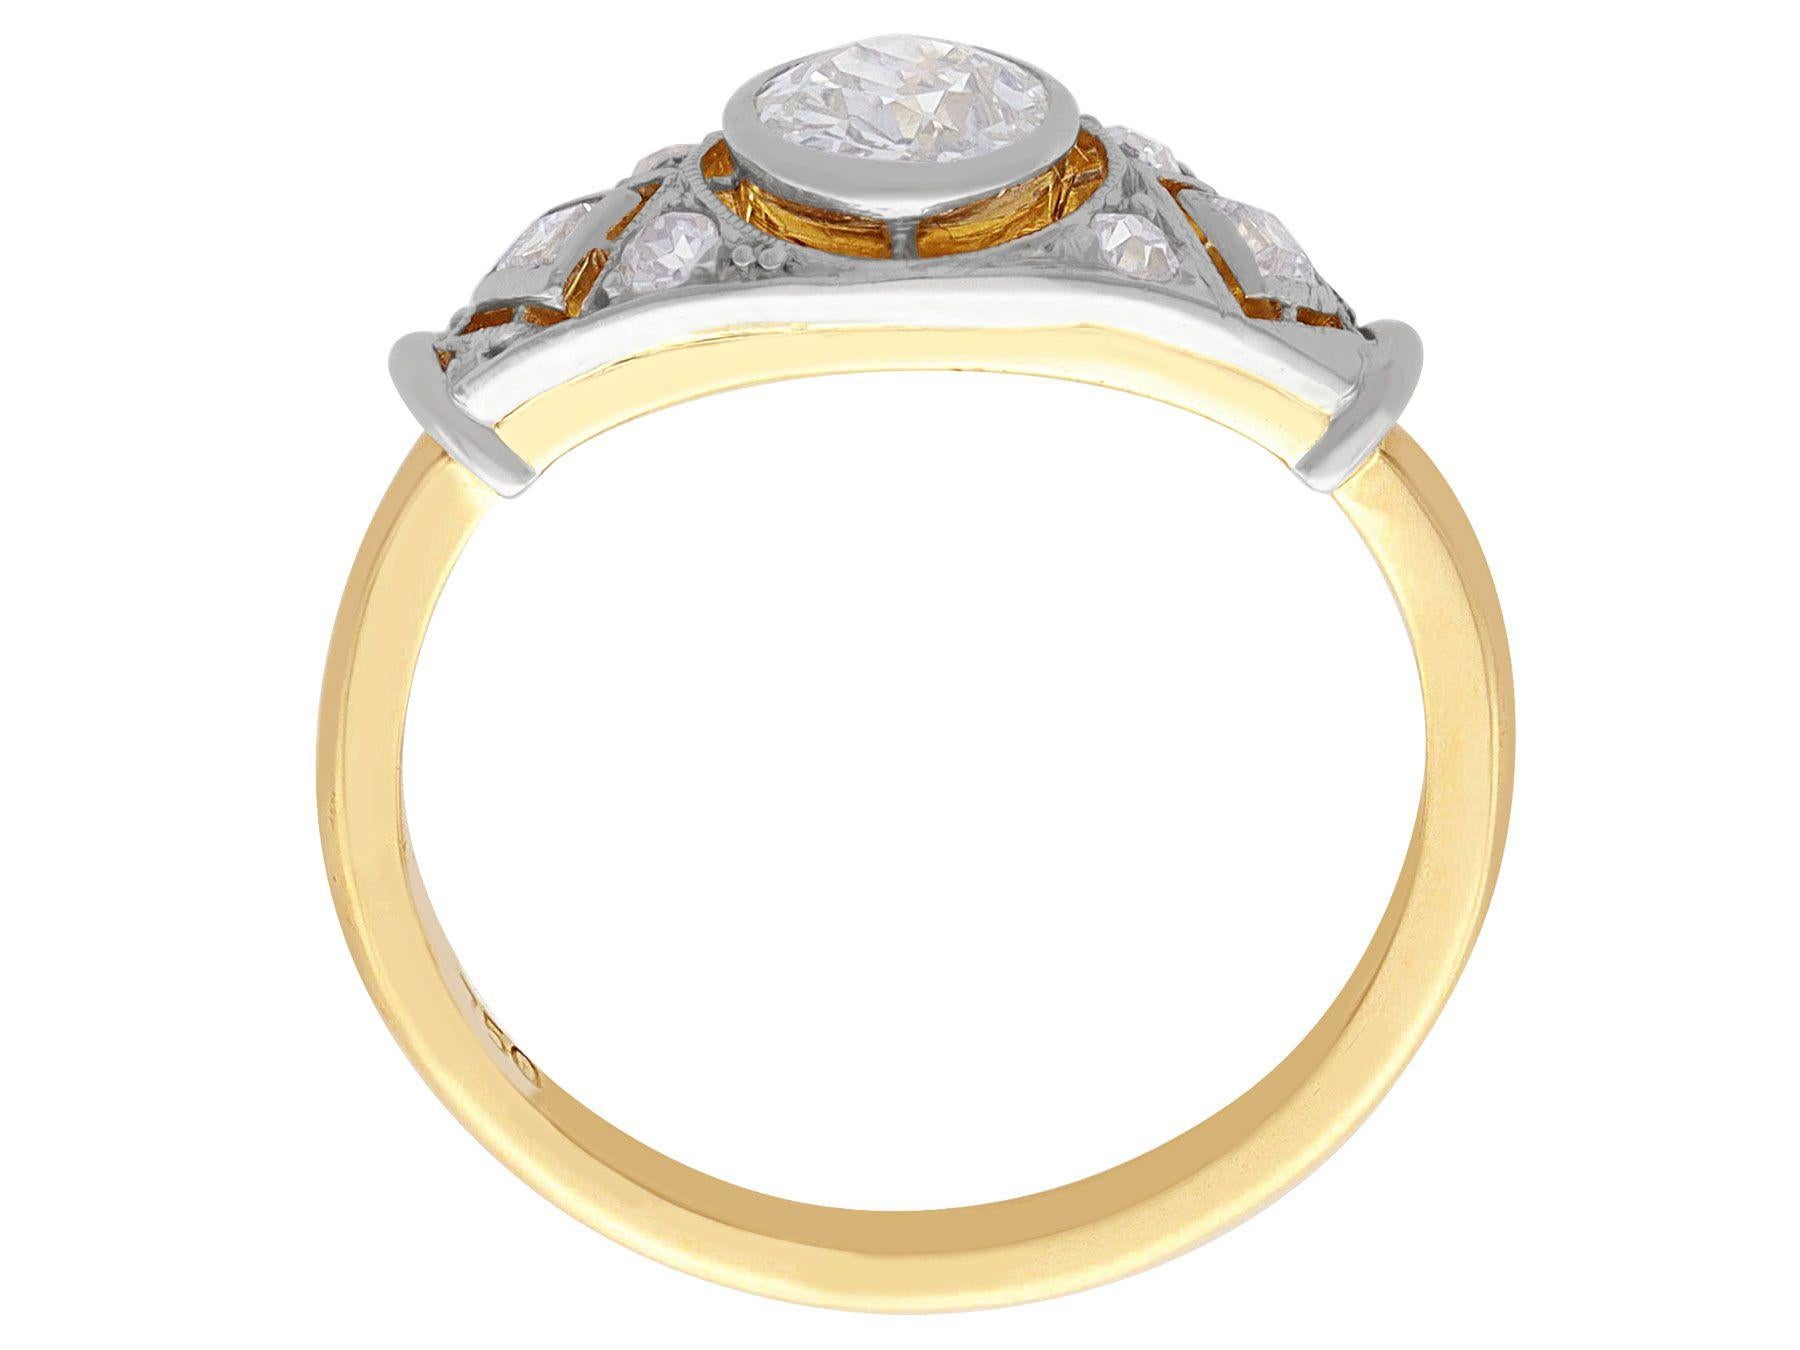 Women's or Men's Antique 0.83 Carat Diamond and 18k Yellow Gold Solitaire Ring, Circa 1920s For Sale